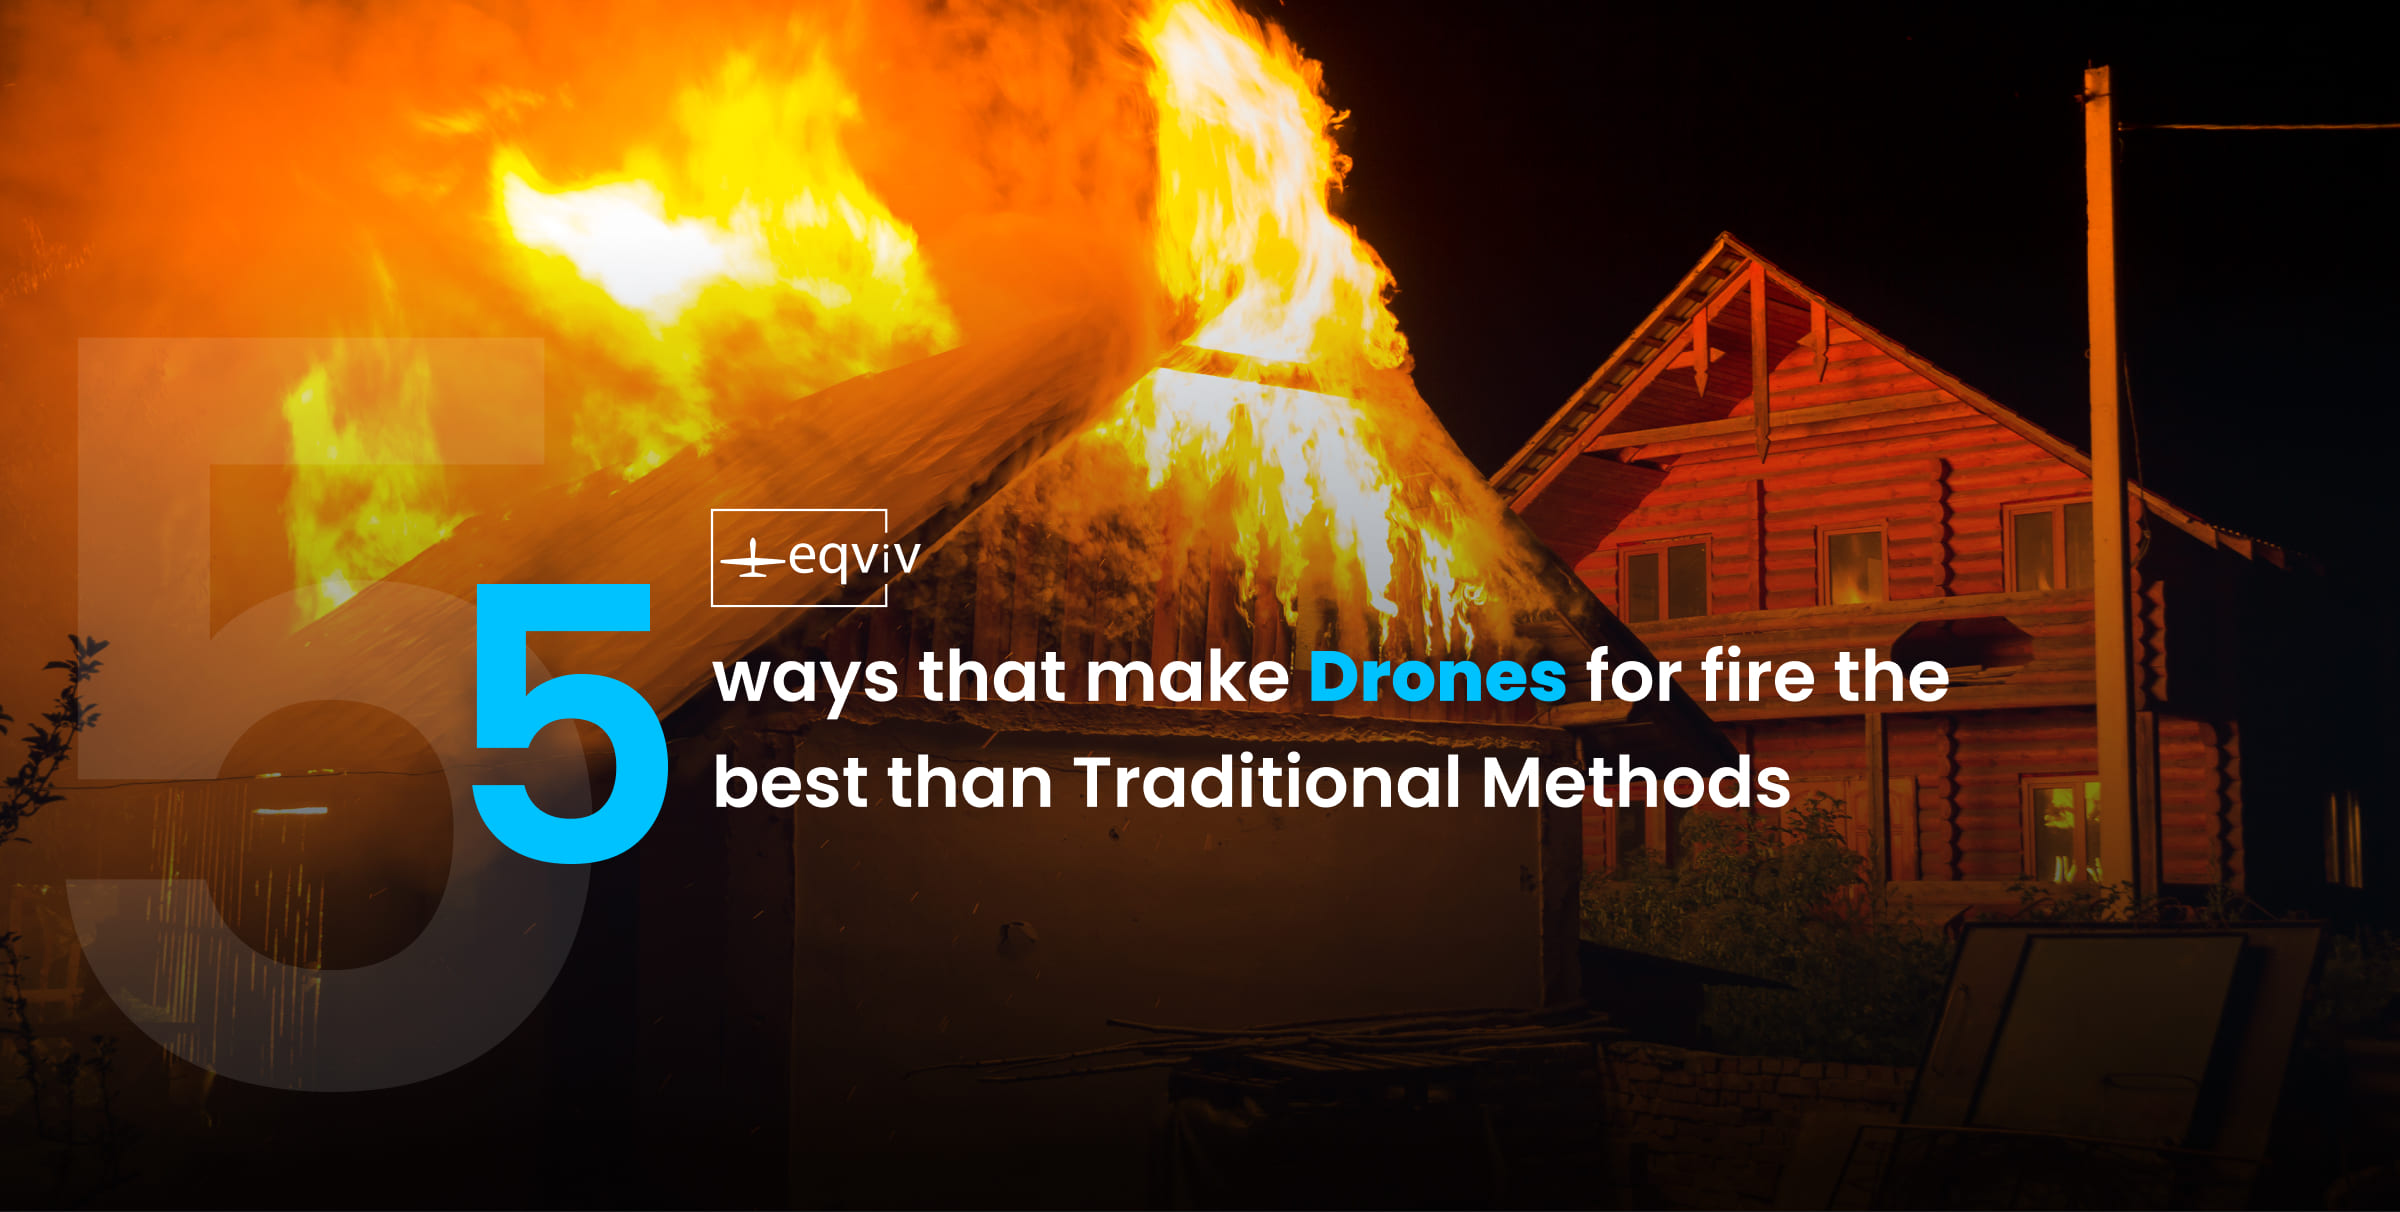 Drones for fire thumbnail